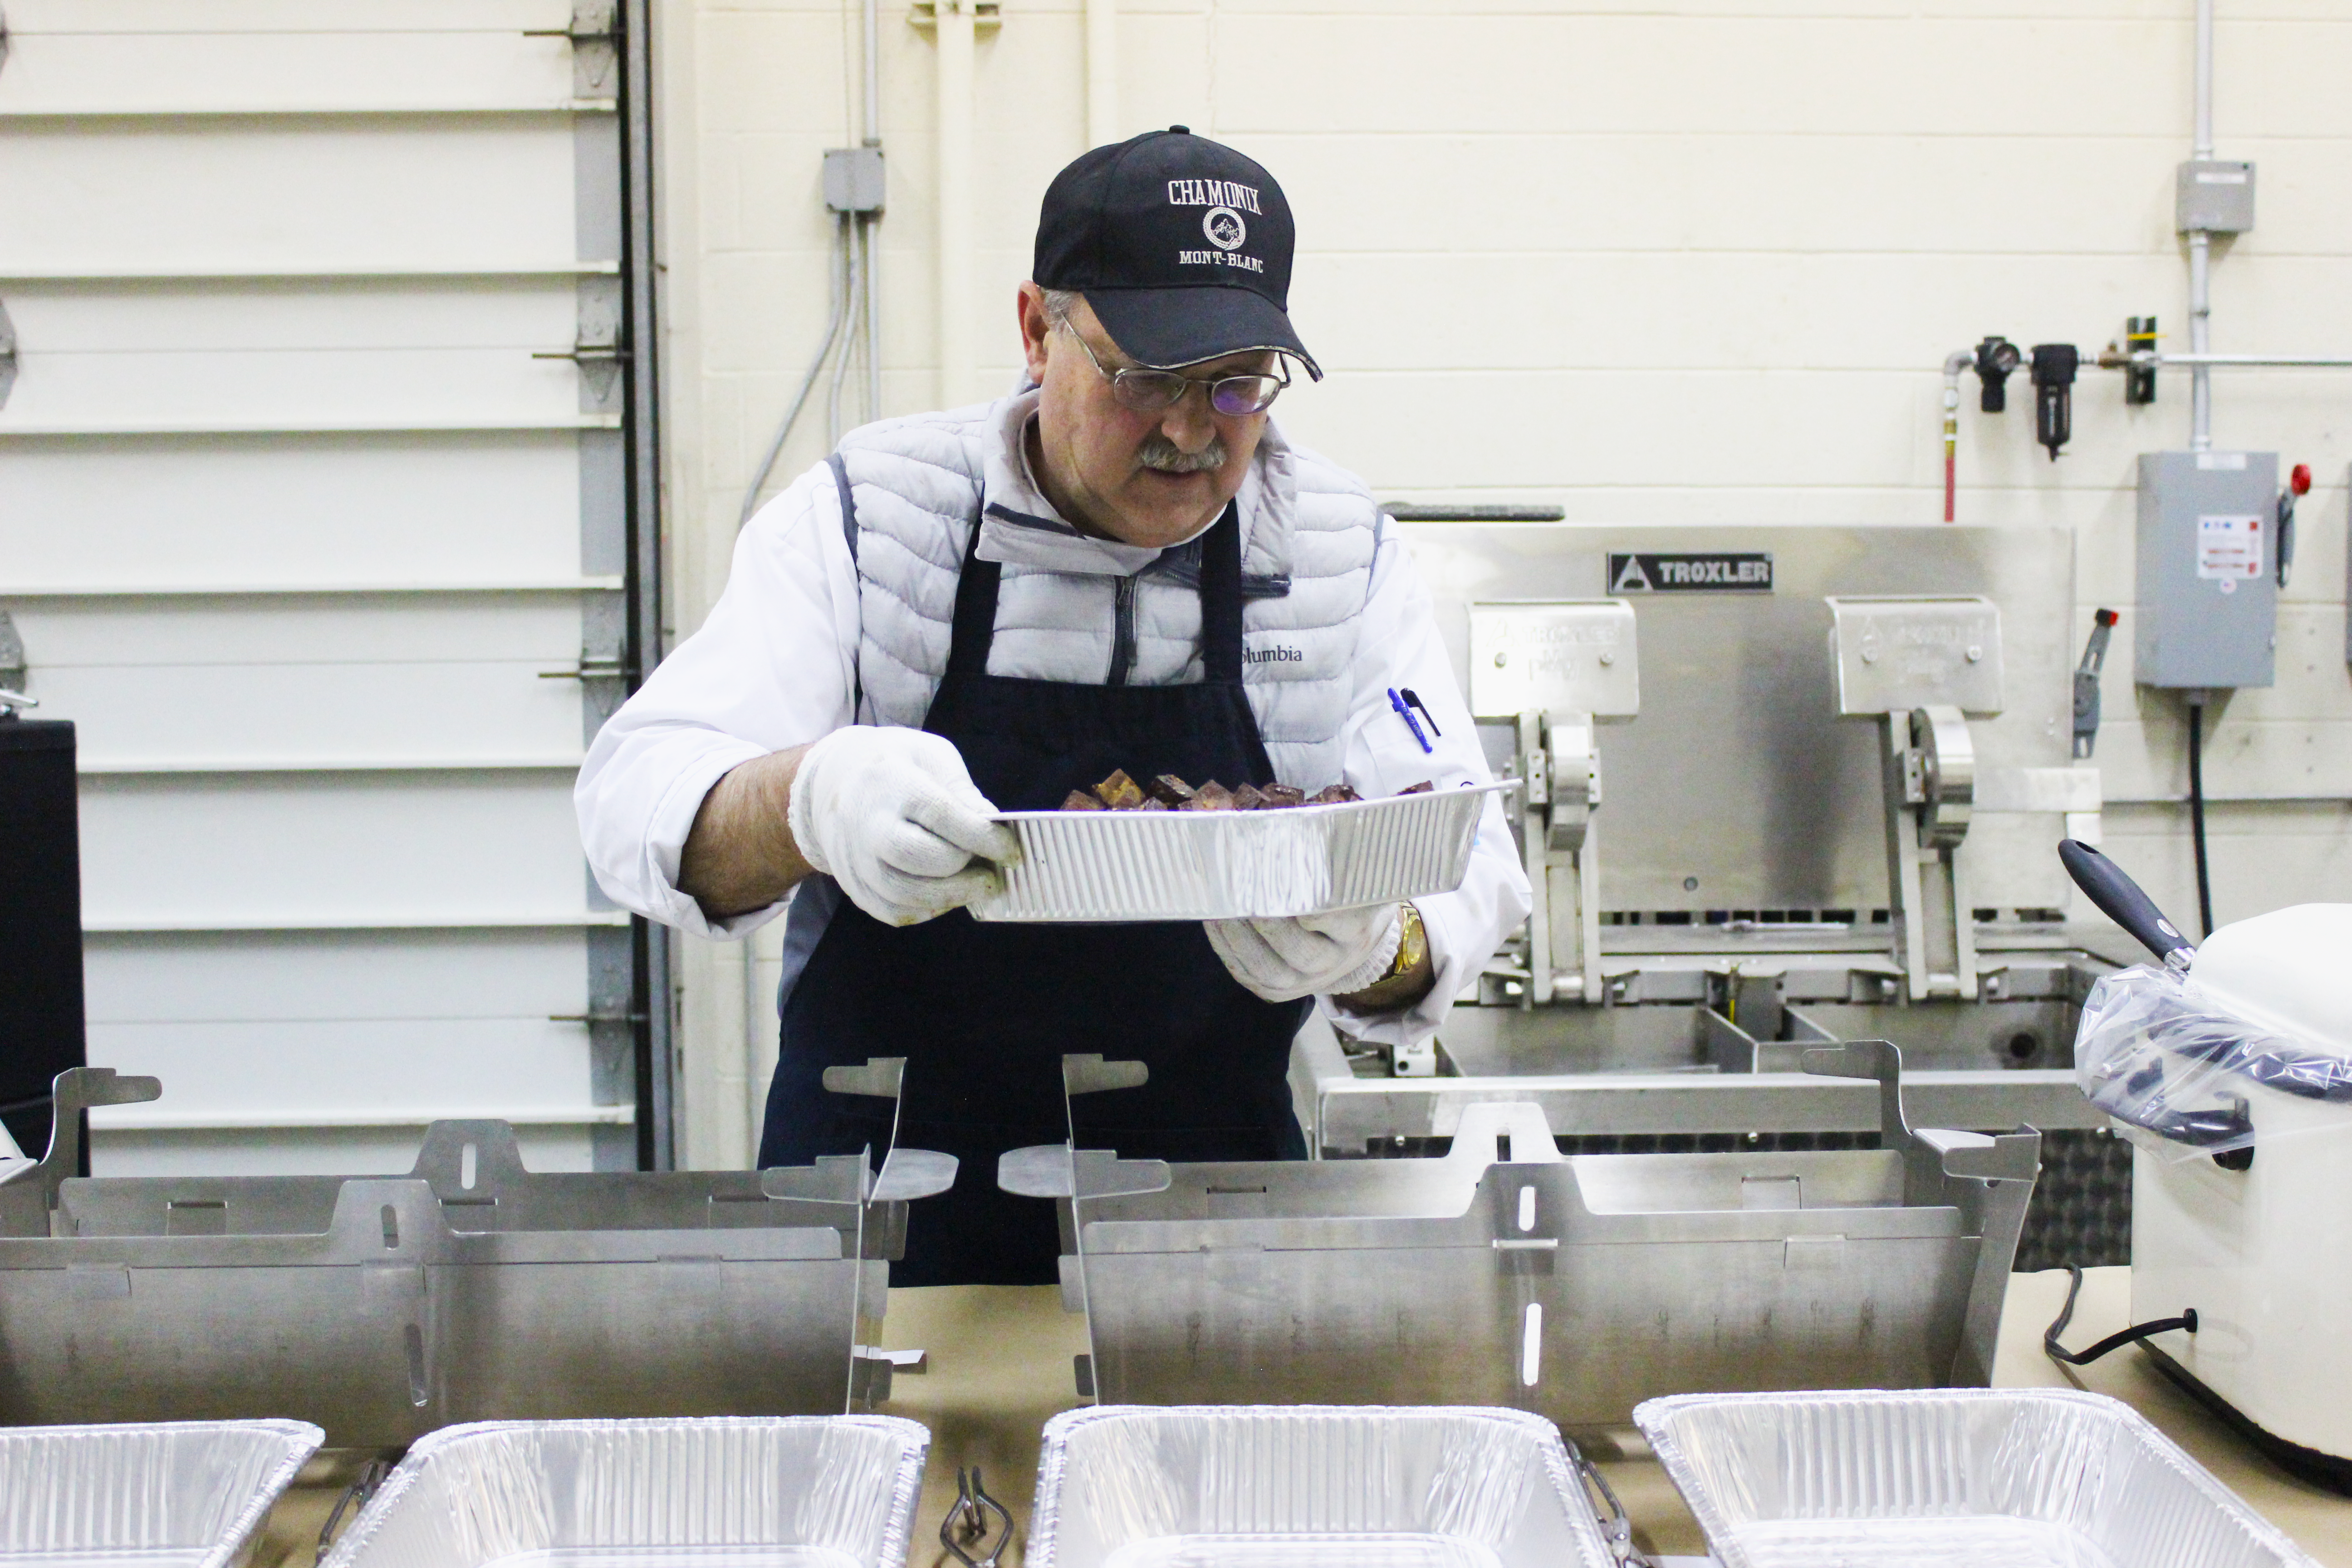 David Lippert stokes his love of barbecue in preparing the Winter Open House feast at ICT in Rantoul, Ill. earlier on Dec. 3, 2019. His efforts always put a big smile on the thankful crowd of faces comprising the CEE faculty, staff and students.